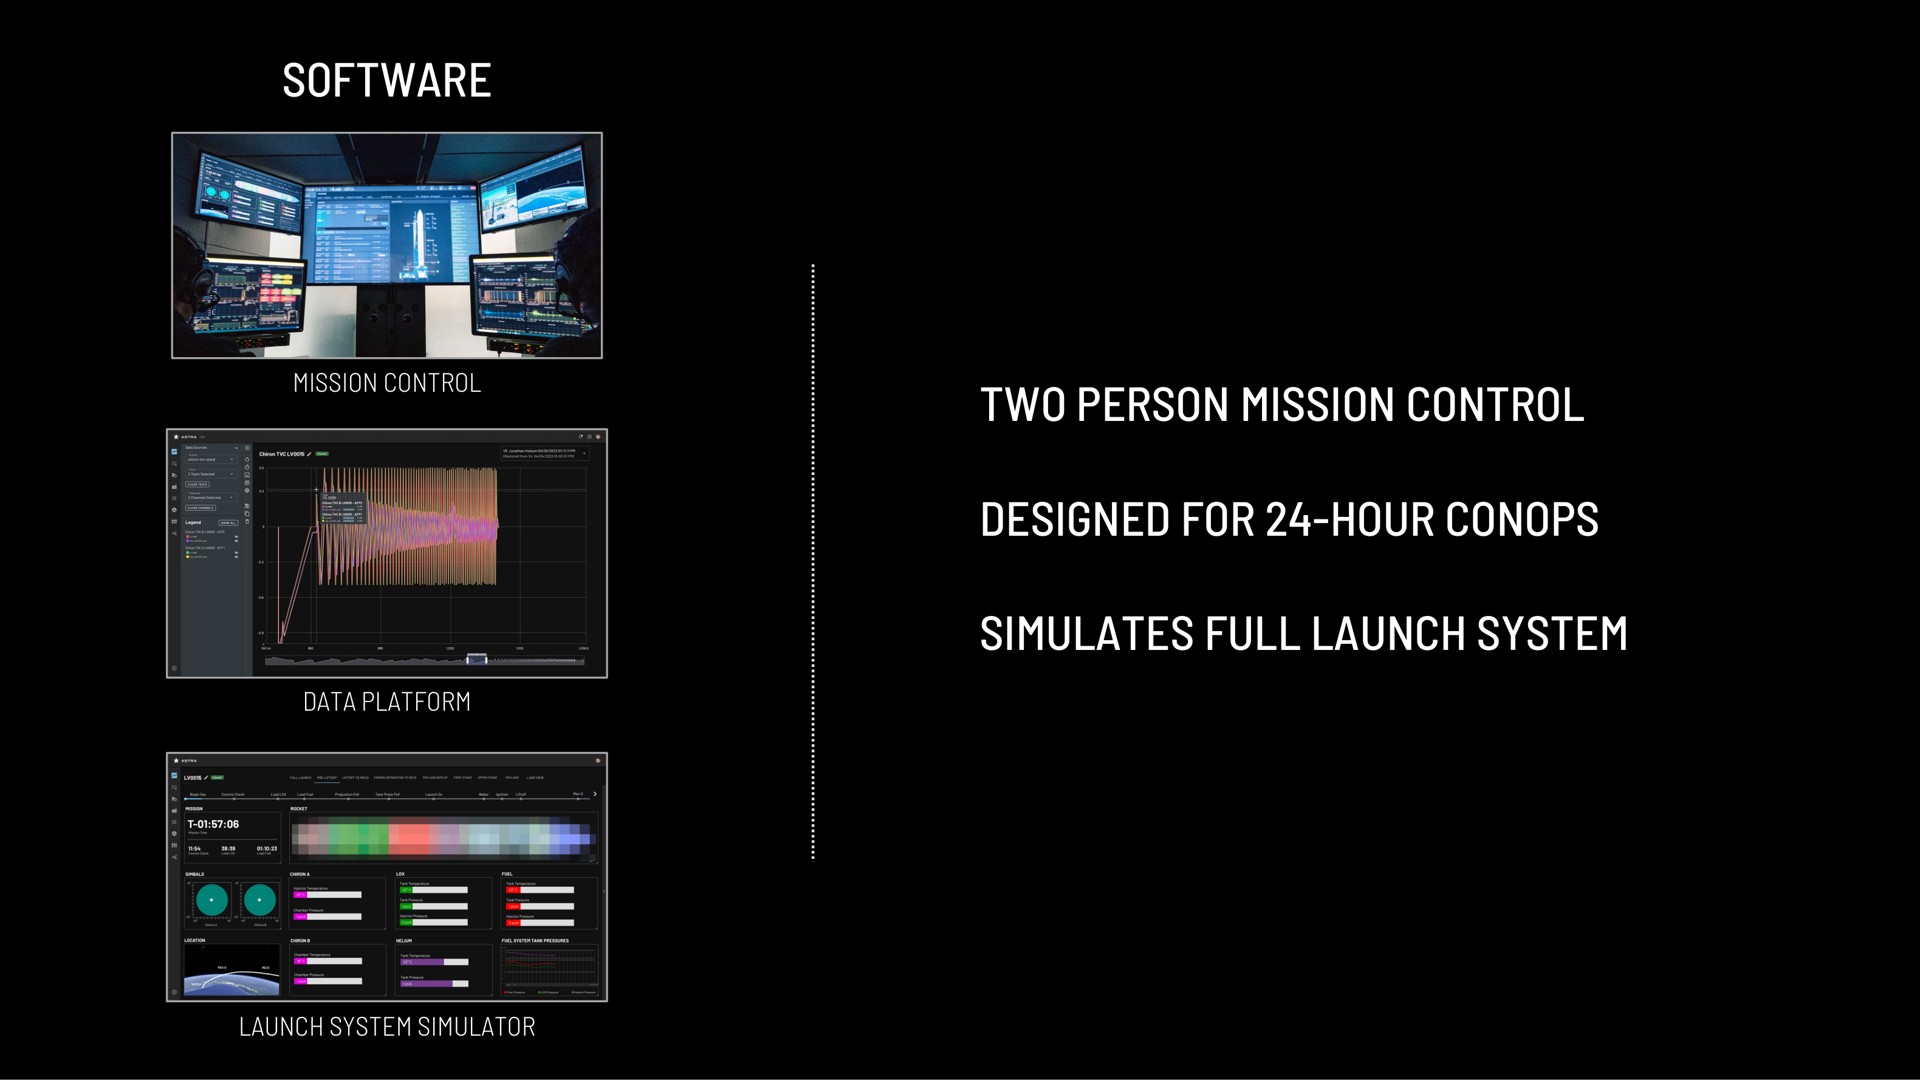 two person mission control designed for hour simulates full launch system | Astra